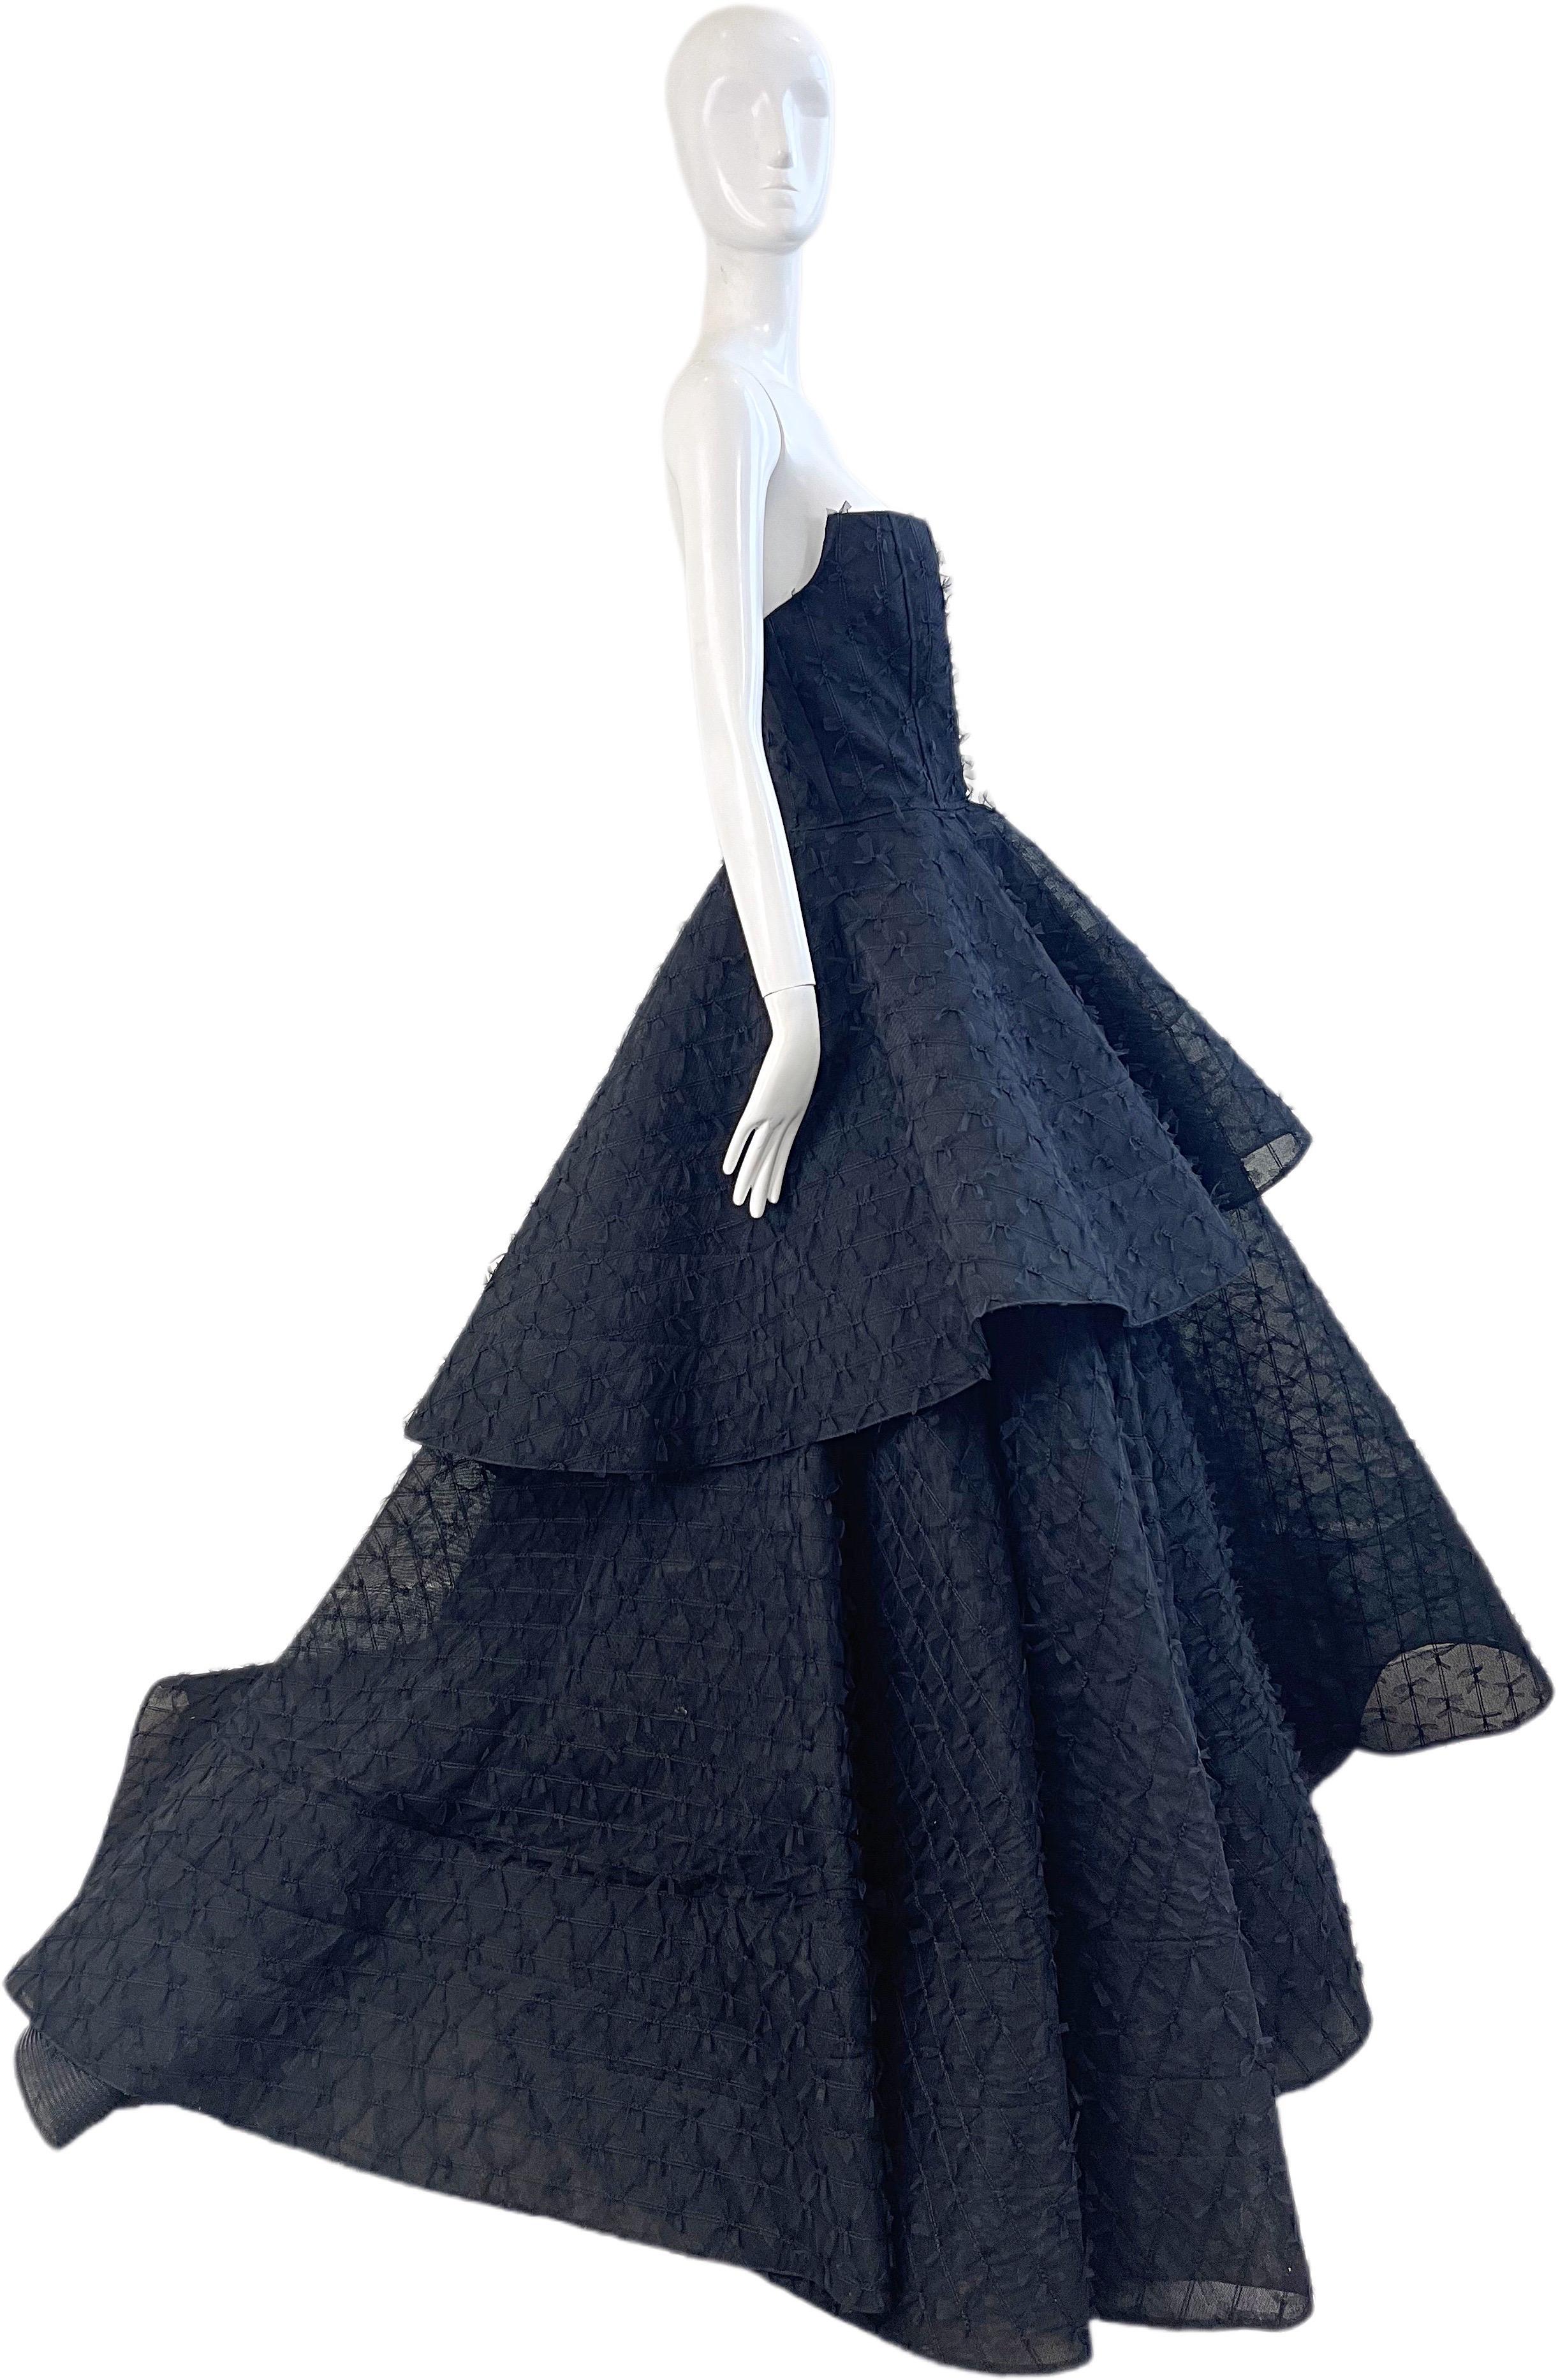 Christian Siriano Couture Spring 2019 Runway Size 4 / 6 Black Horsehair Gown For Sale 8